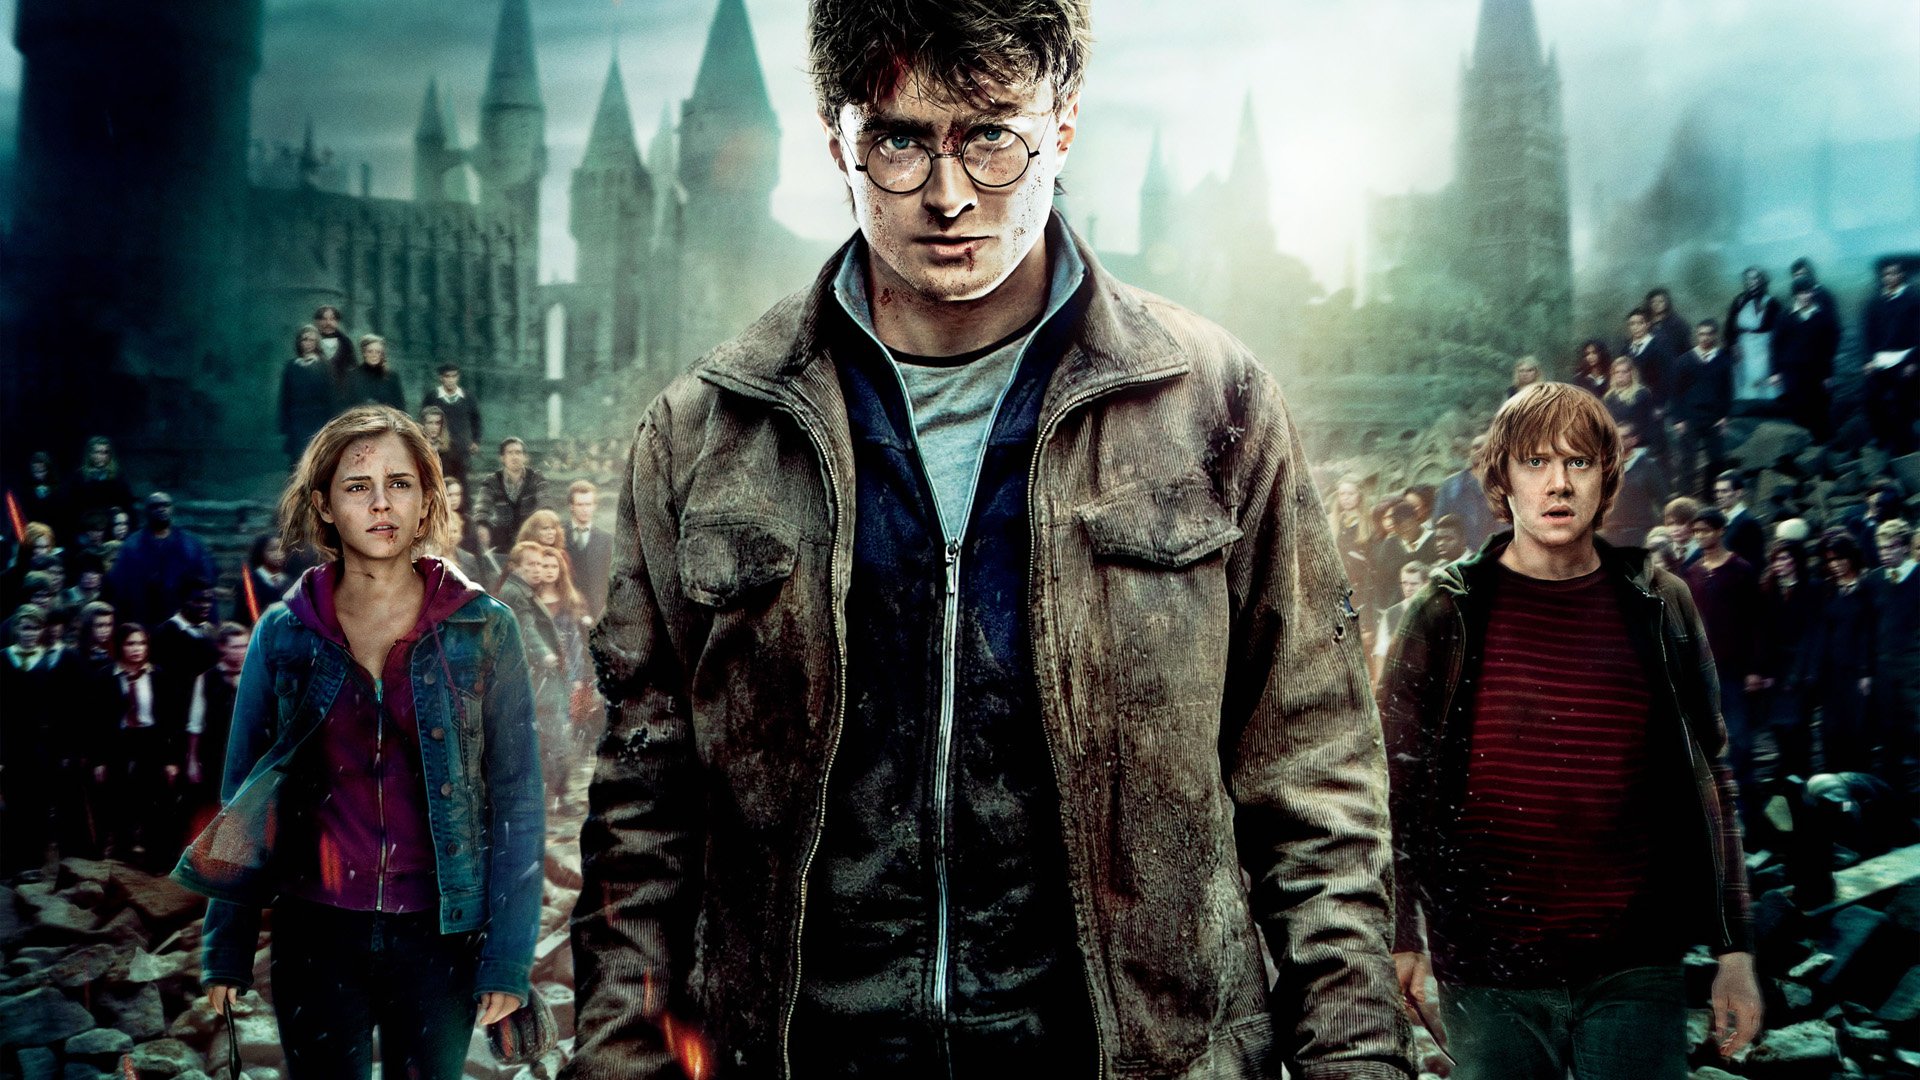 Harry Potter And The Deathly Hallows Part 2 - HD Wallpaper 